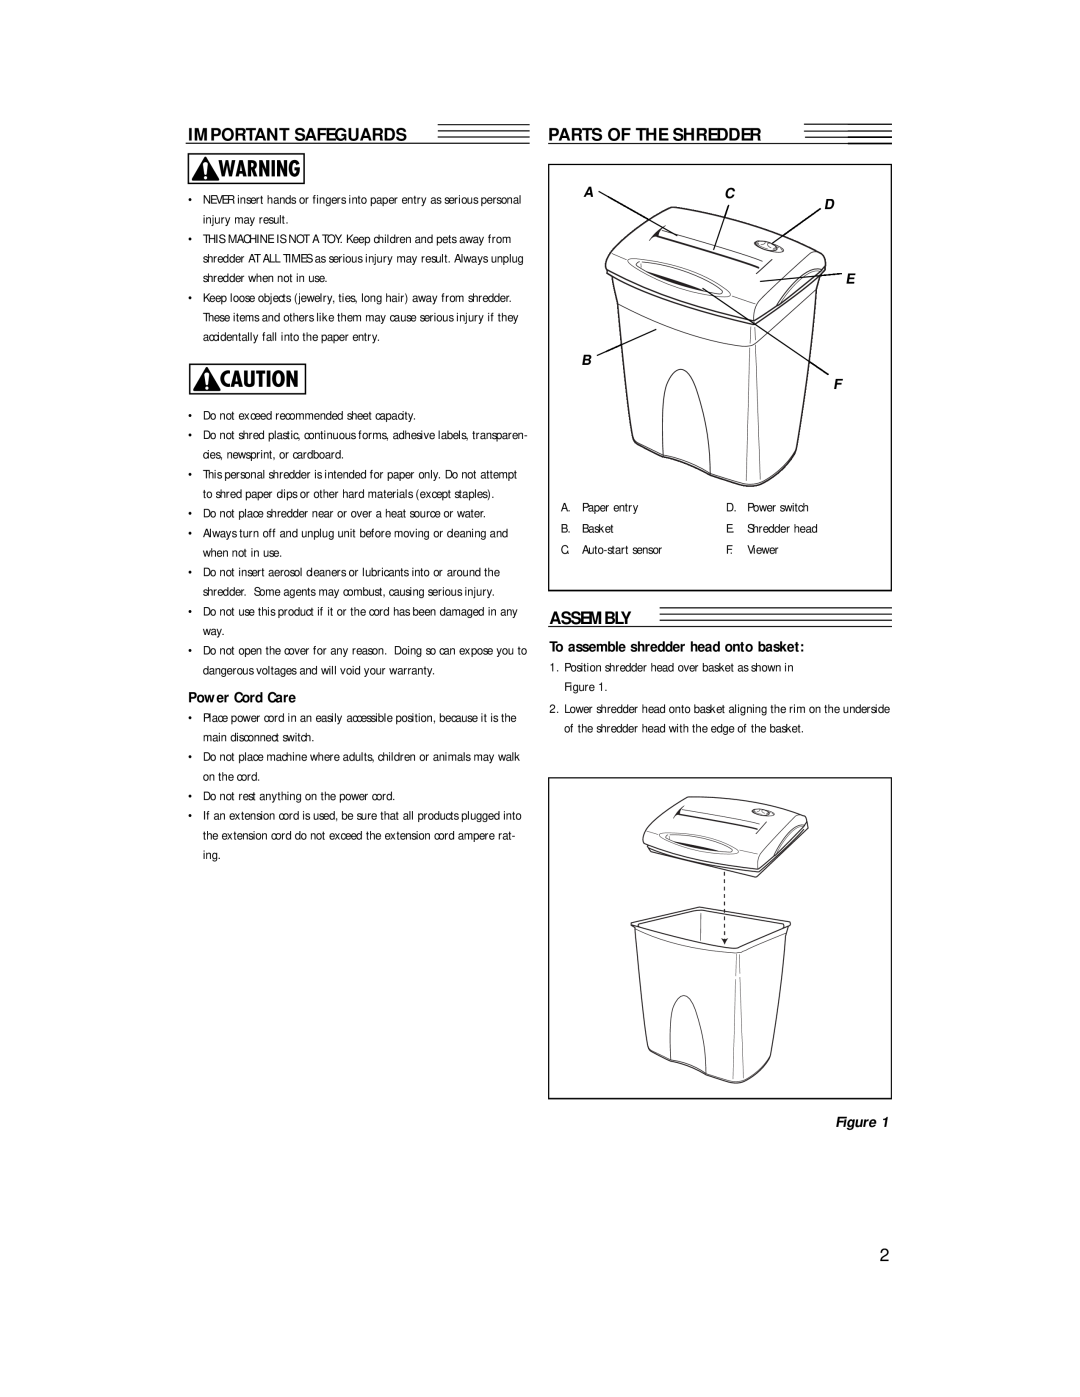 Fellowes S50-2 Important Safeguards, Parts Of The Shredder, Power Cord Care, E B F, To assemble shredder head onto basket 